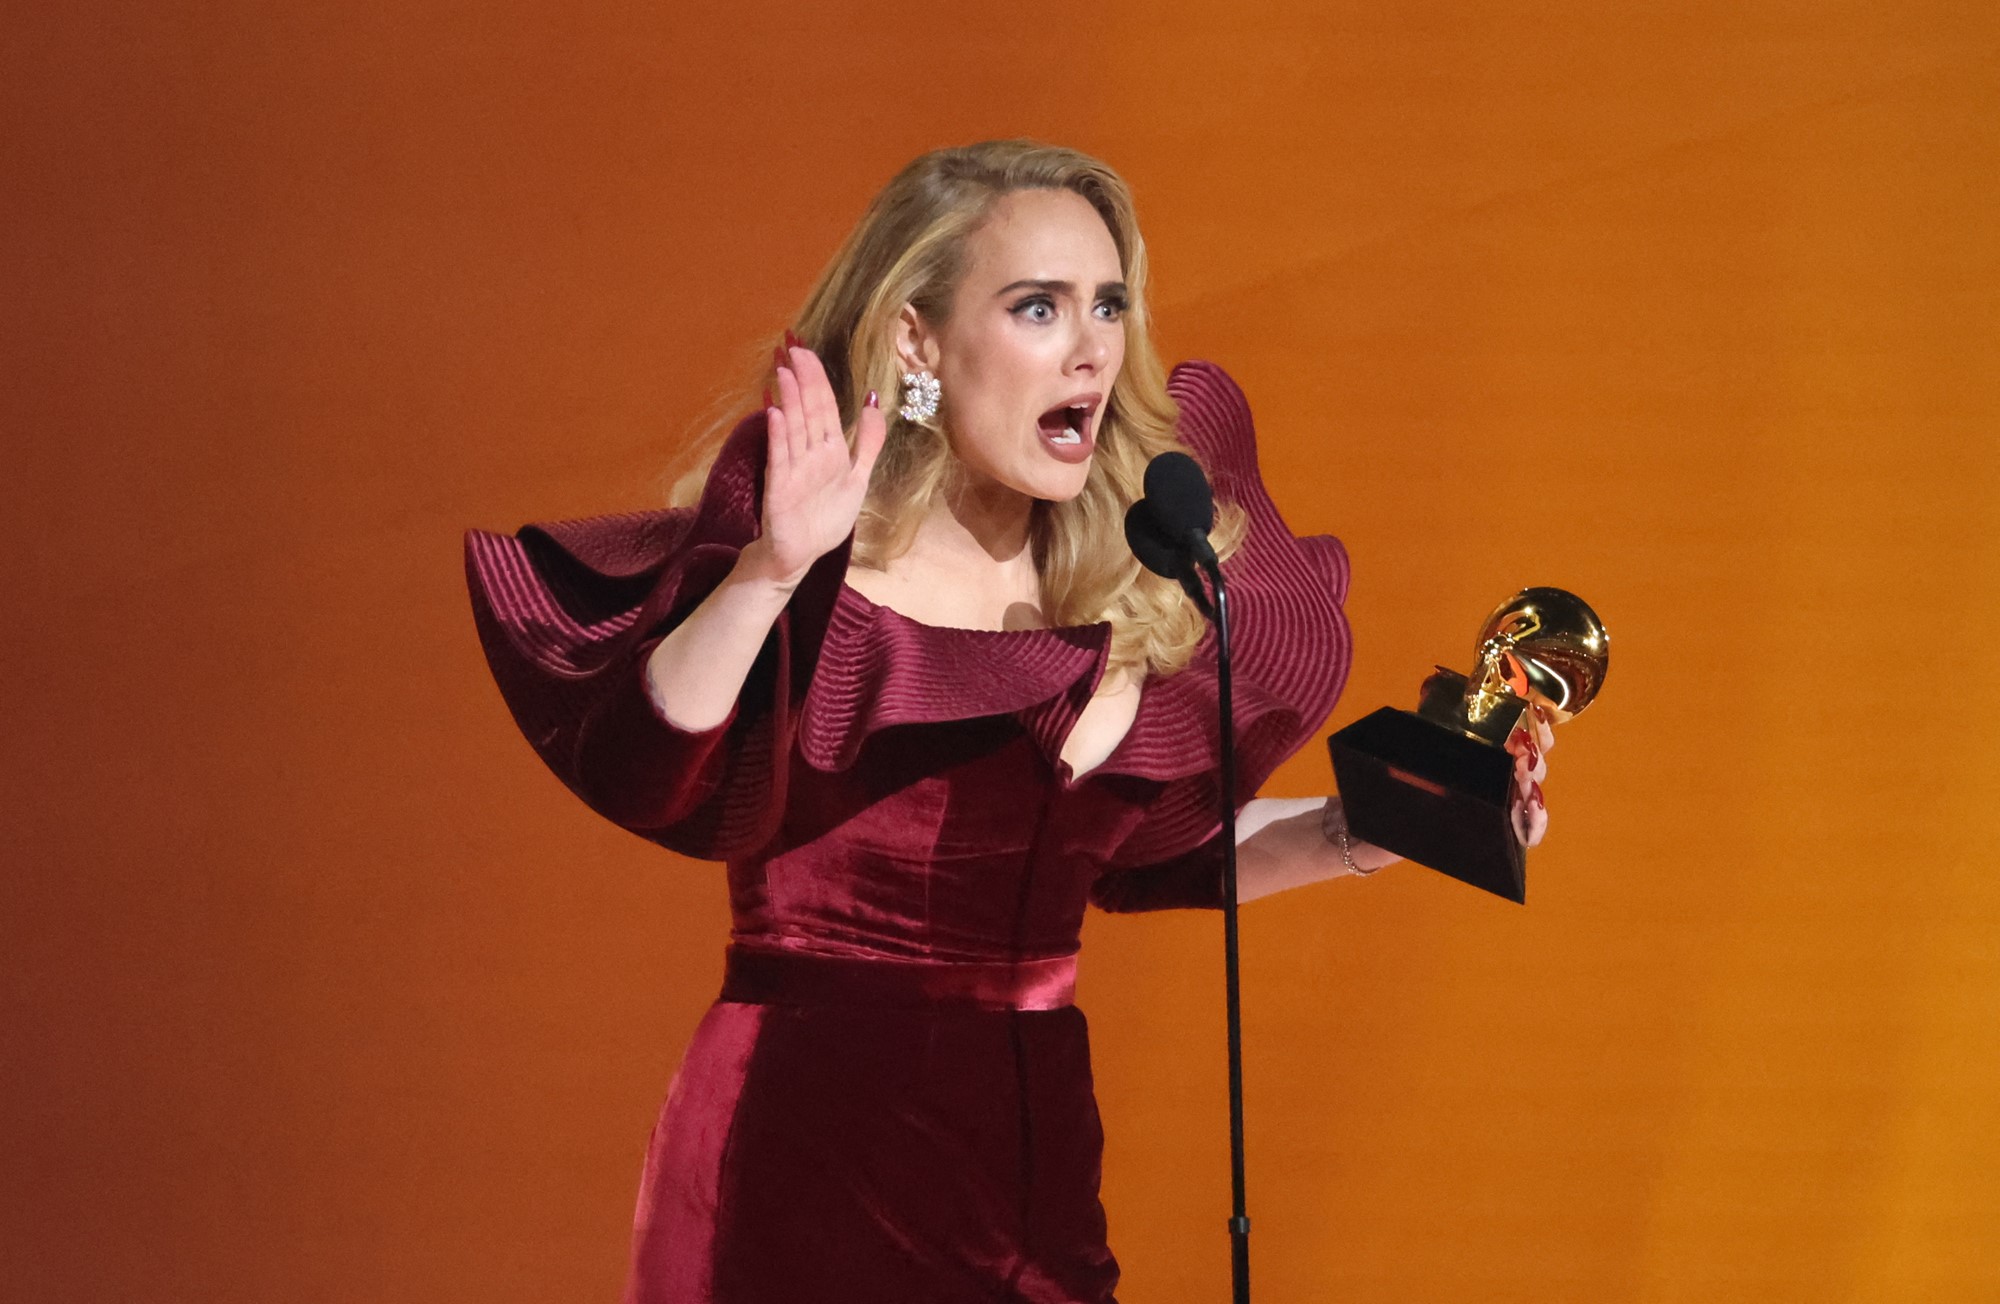 Adele talking into a microphine